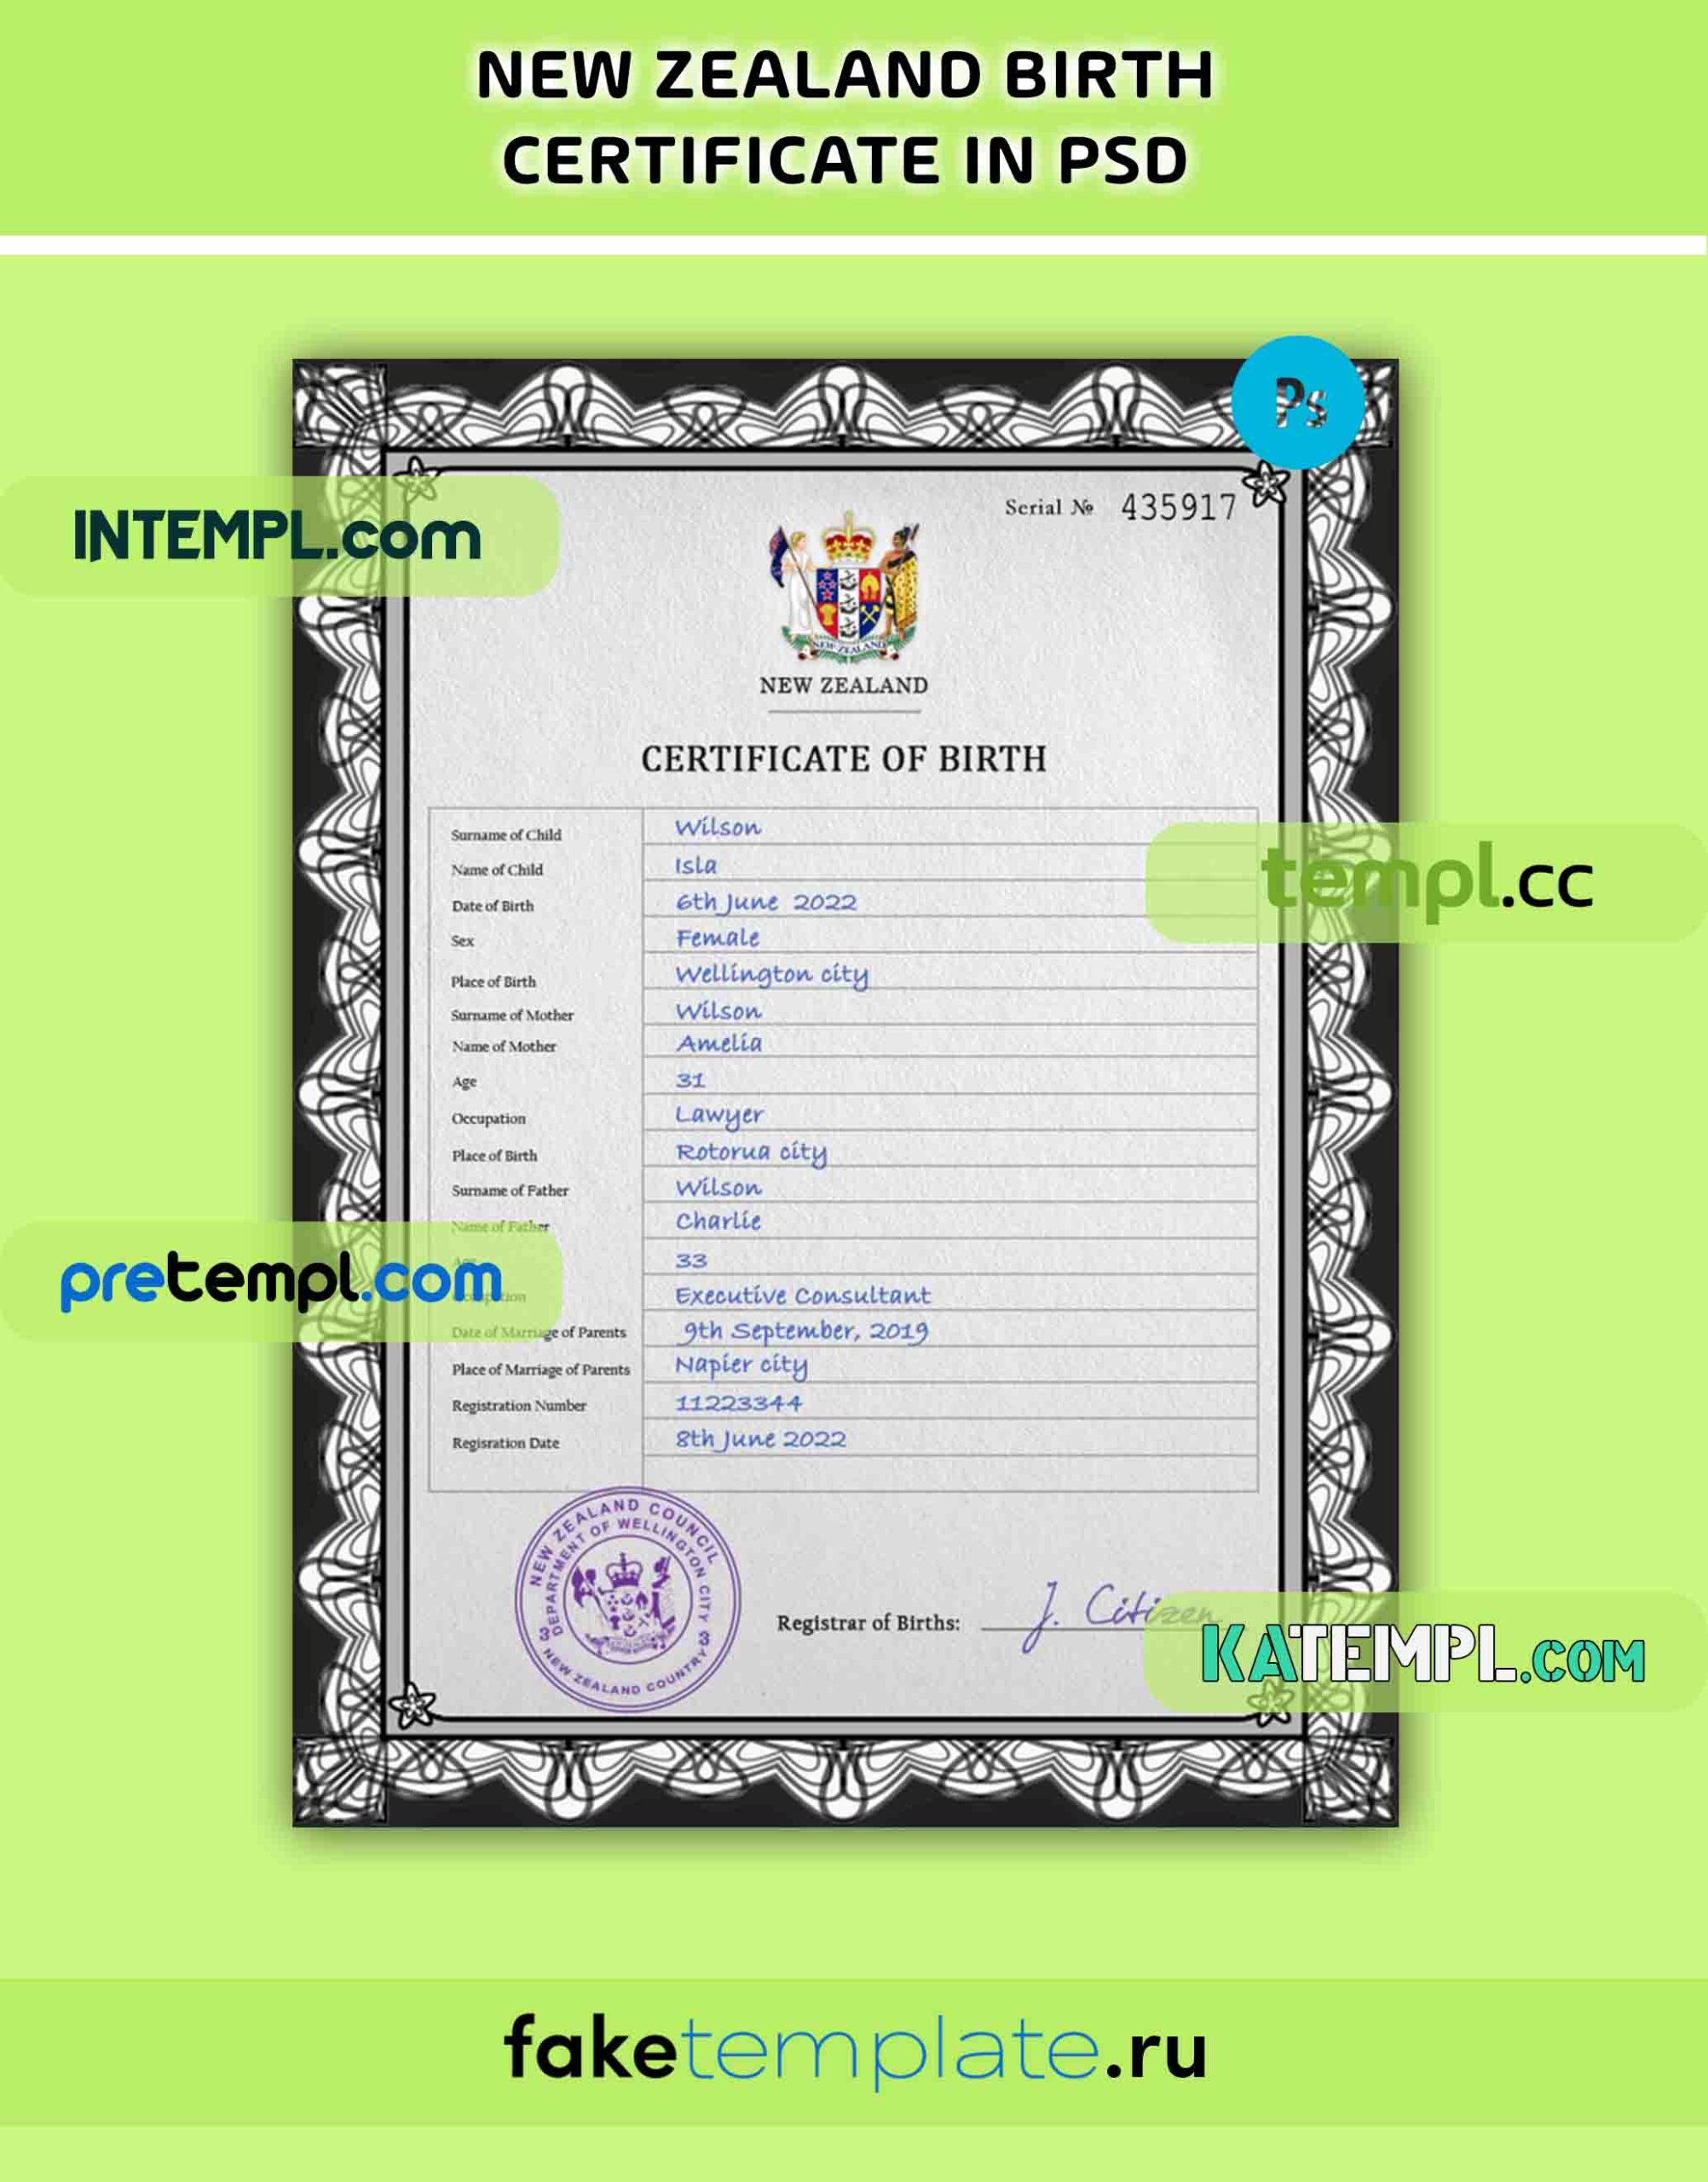 New Zealand Birth Certificate Psd Download Template 7813